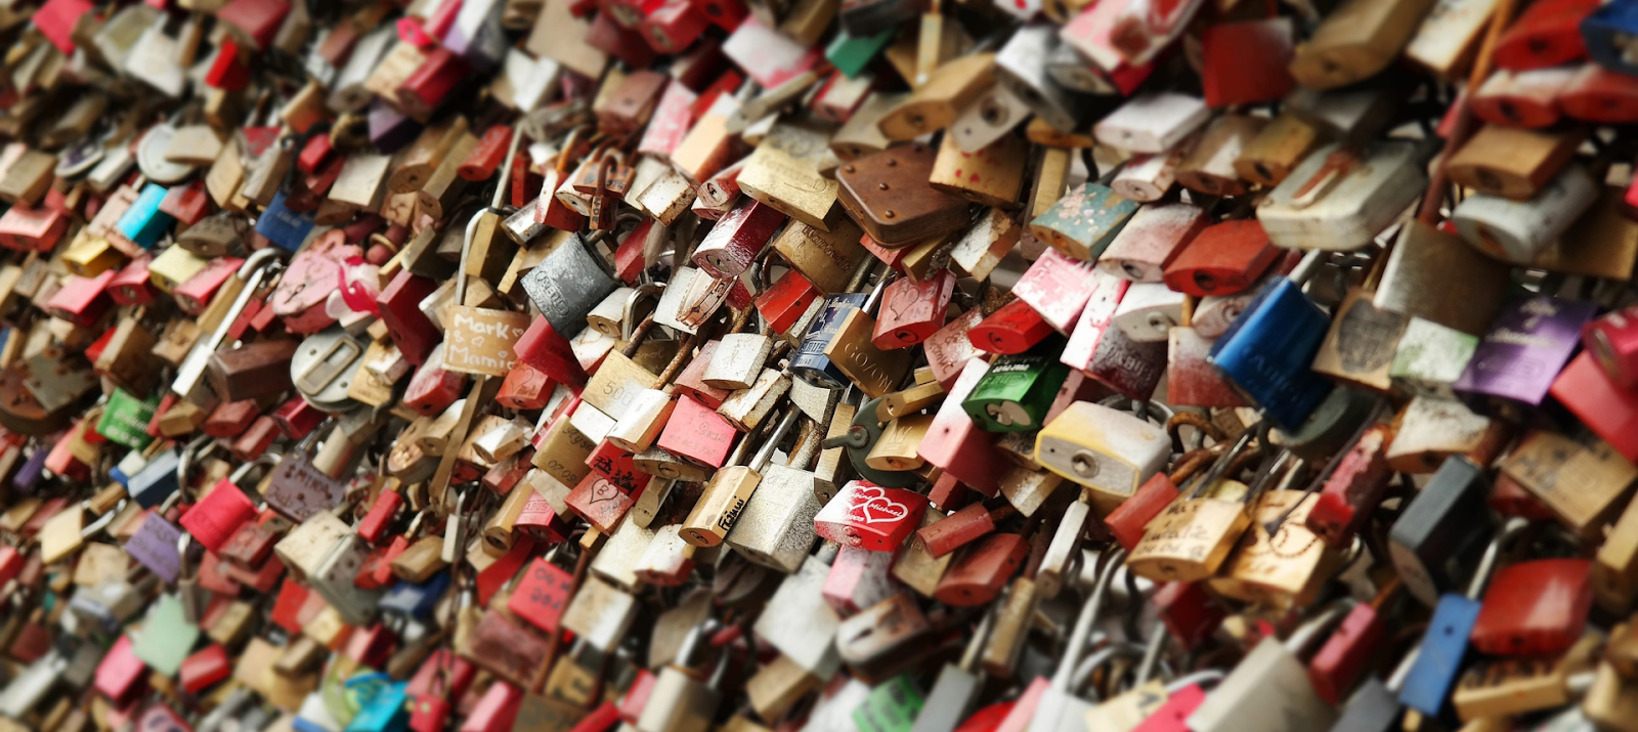 A photo of a very large number of locks attached to a structure like a fence that is not visible because it is entirely covered by the locks. Some locks have writing or heart symbols on them.